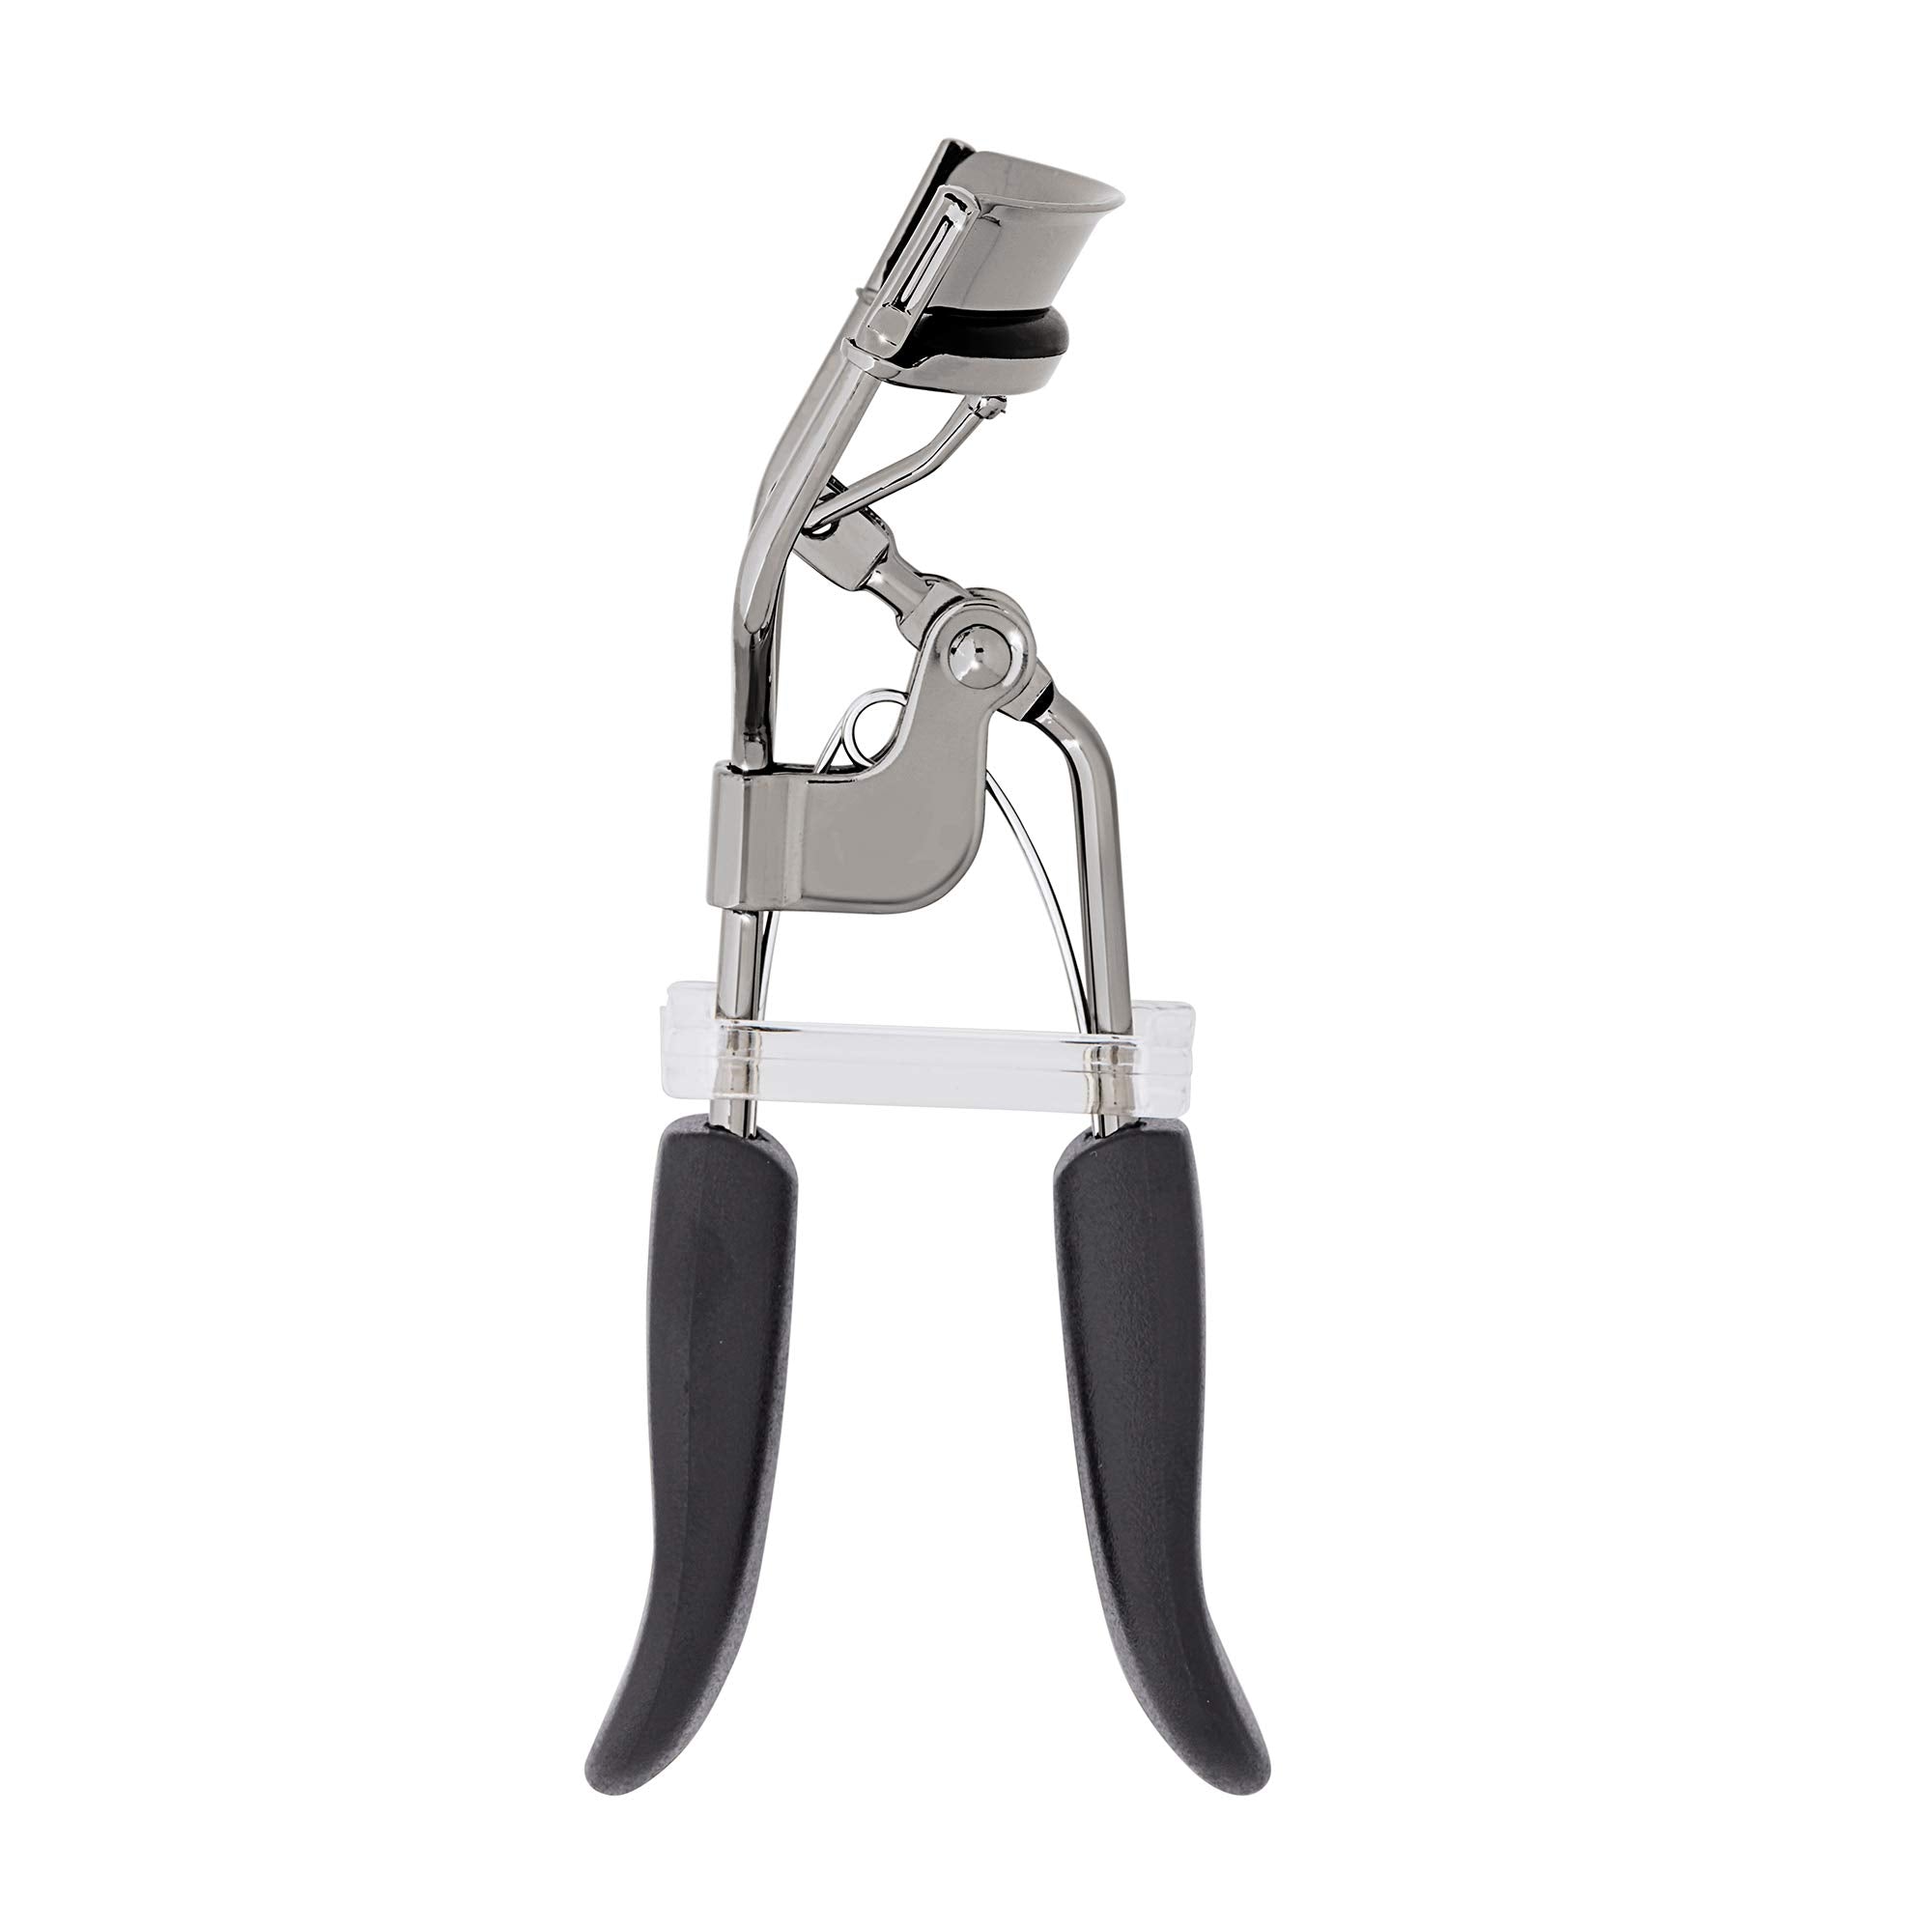 e.l.f. Pro Eyelash Curler Strong, Contoured, Lifting Creates Long Lasting, Eye-Opening, Voluminous Lashes Includes Additional Rubber Replacement Pad